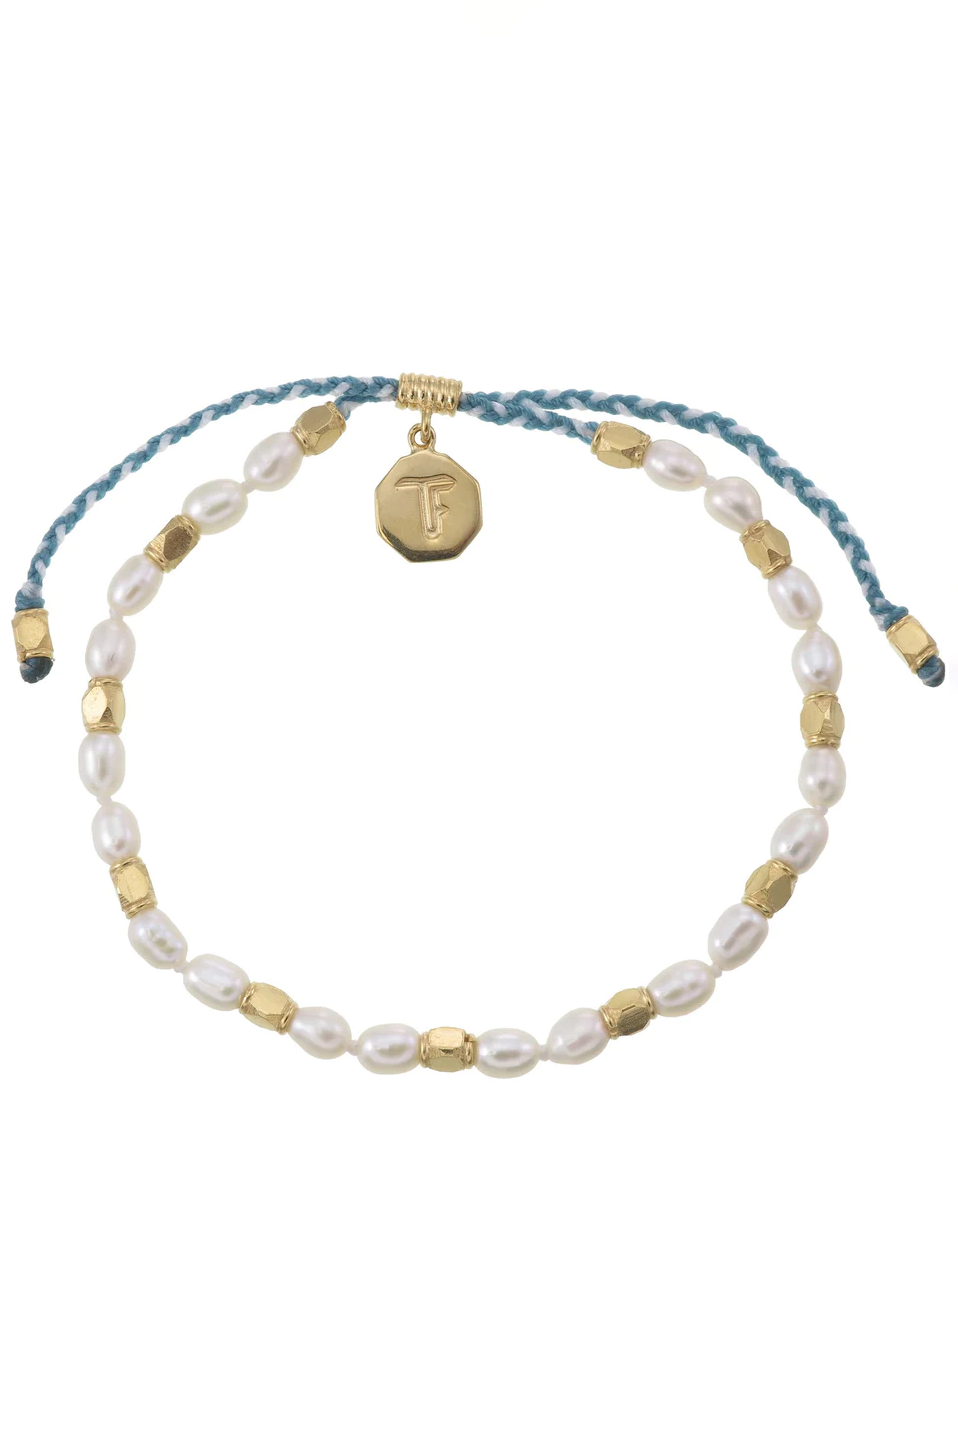 Tiger Frame | Mini Pearls Hand Knotted Bracelet - Green and White - Gold